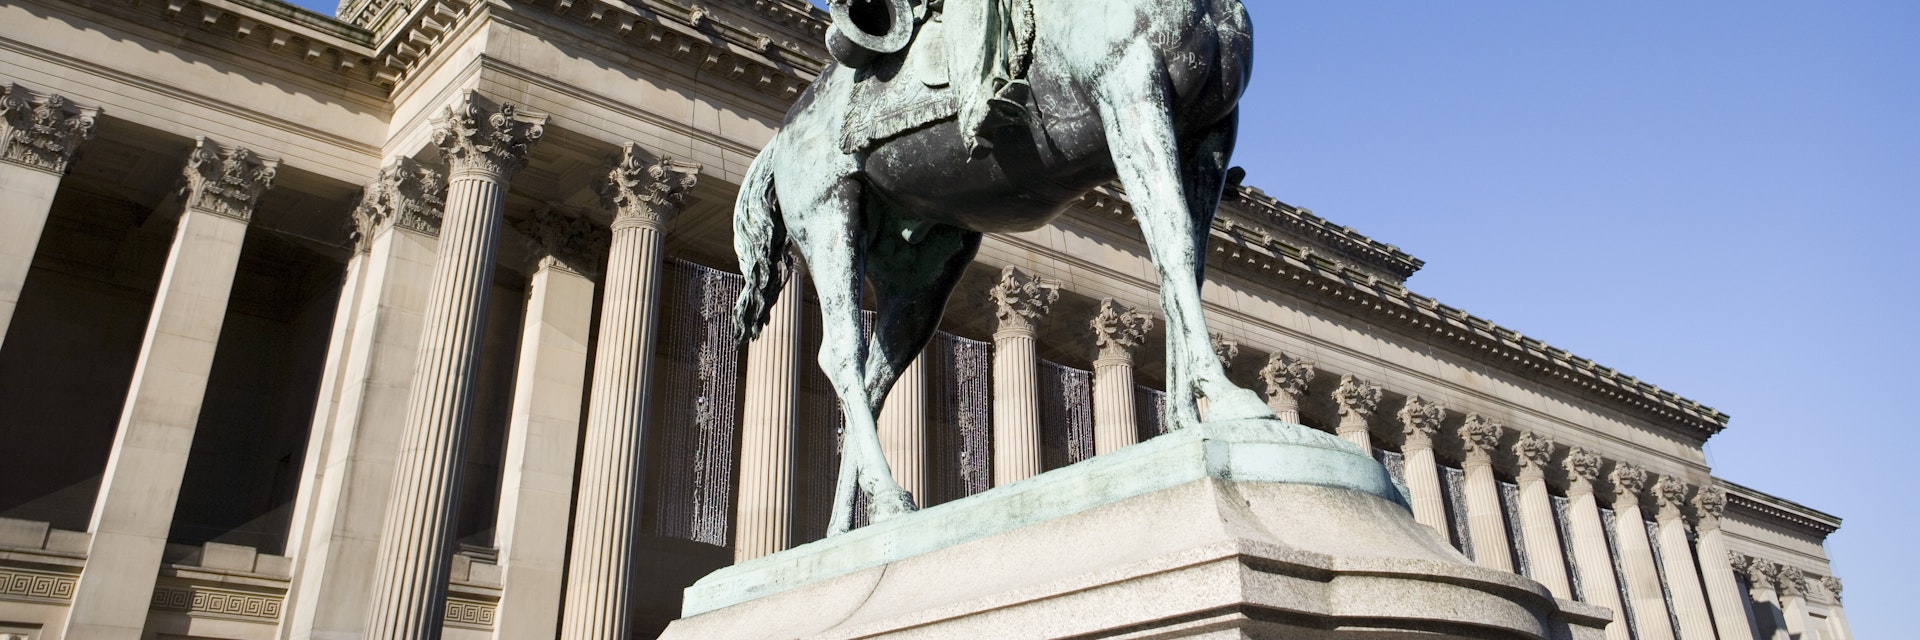 England, Liverpool, Equestrian Statue of Prince Albert, low angle view